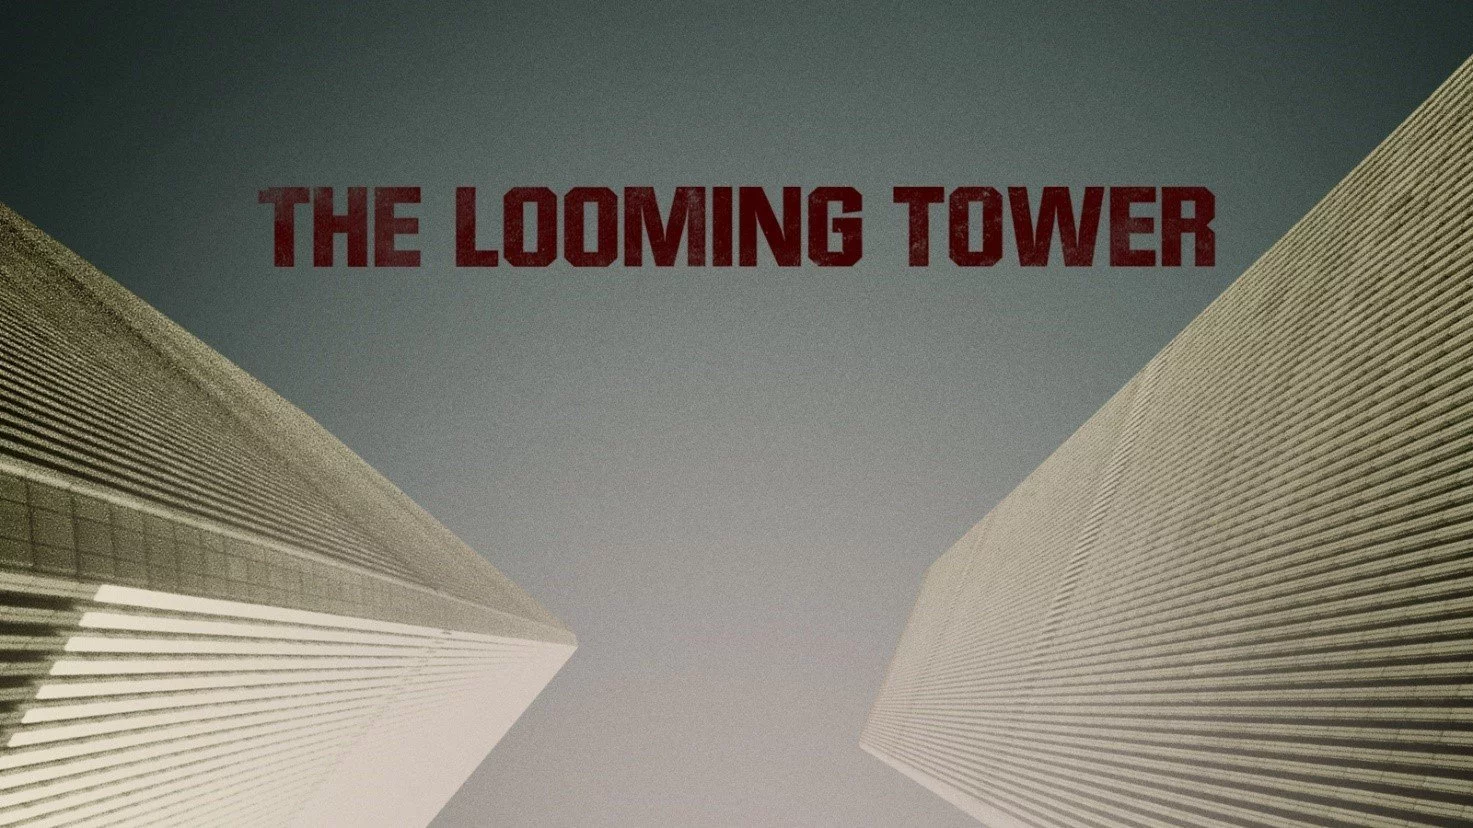 The Looming Tower Amazon